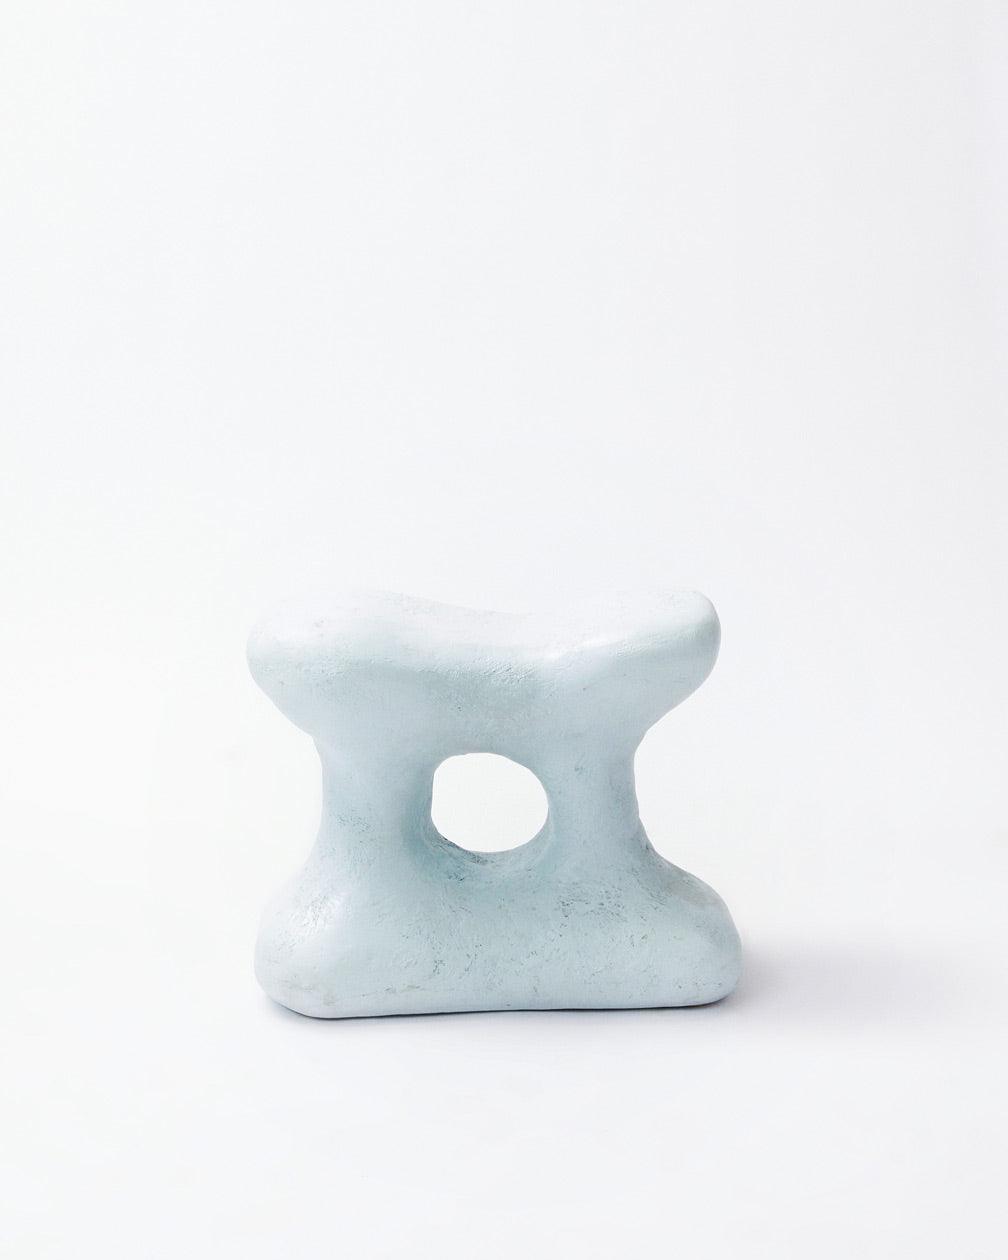 Hand-carved collectible white stool by NIKO JUNE in front position in white background